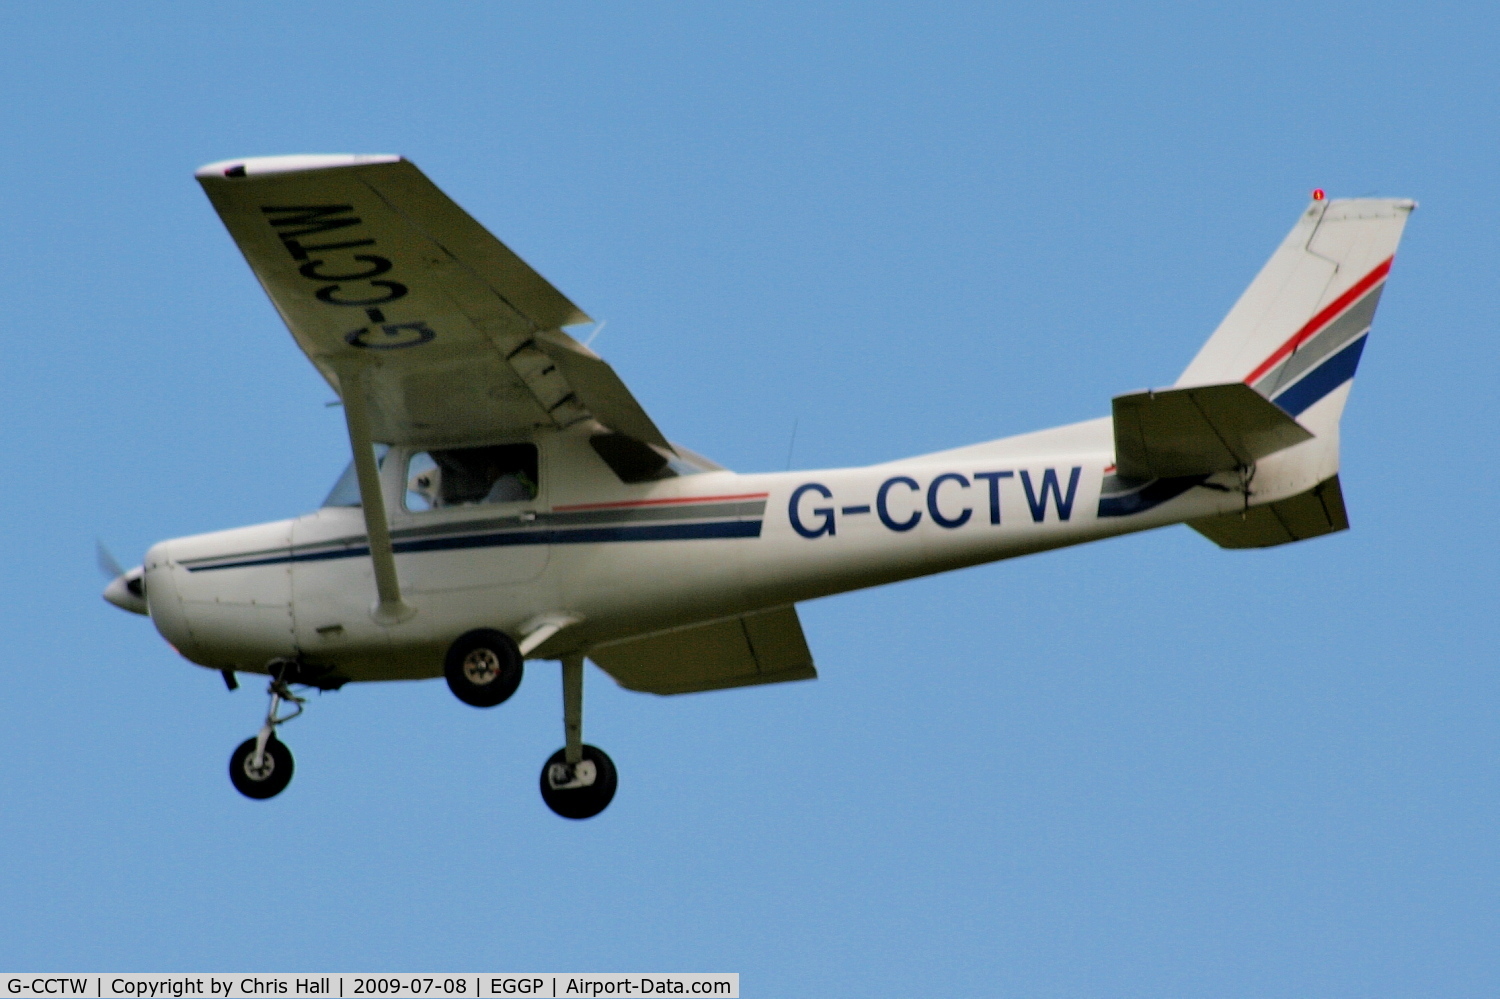 G-CCTW, 1977 Cessna 152 C/N 152-79882, privately owned, Previous ID: N757NW